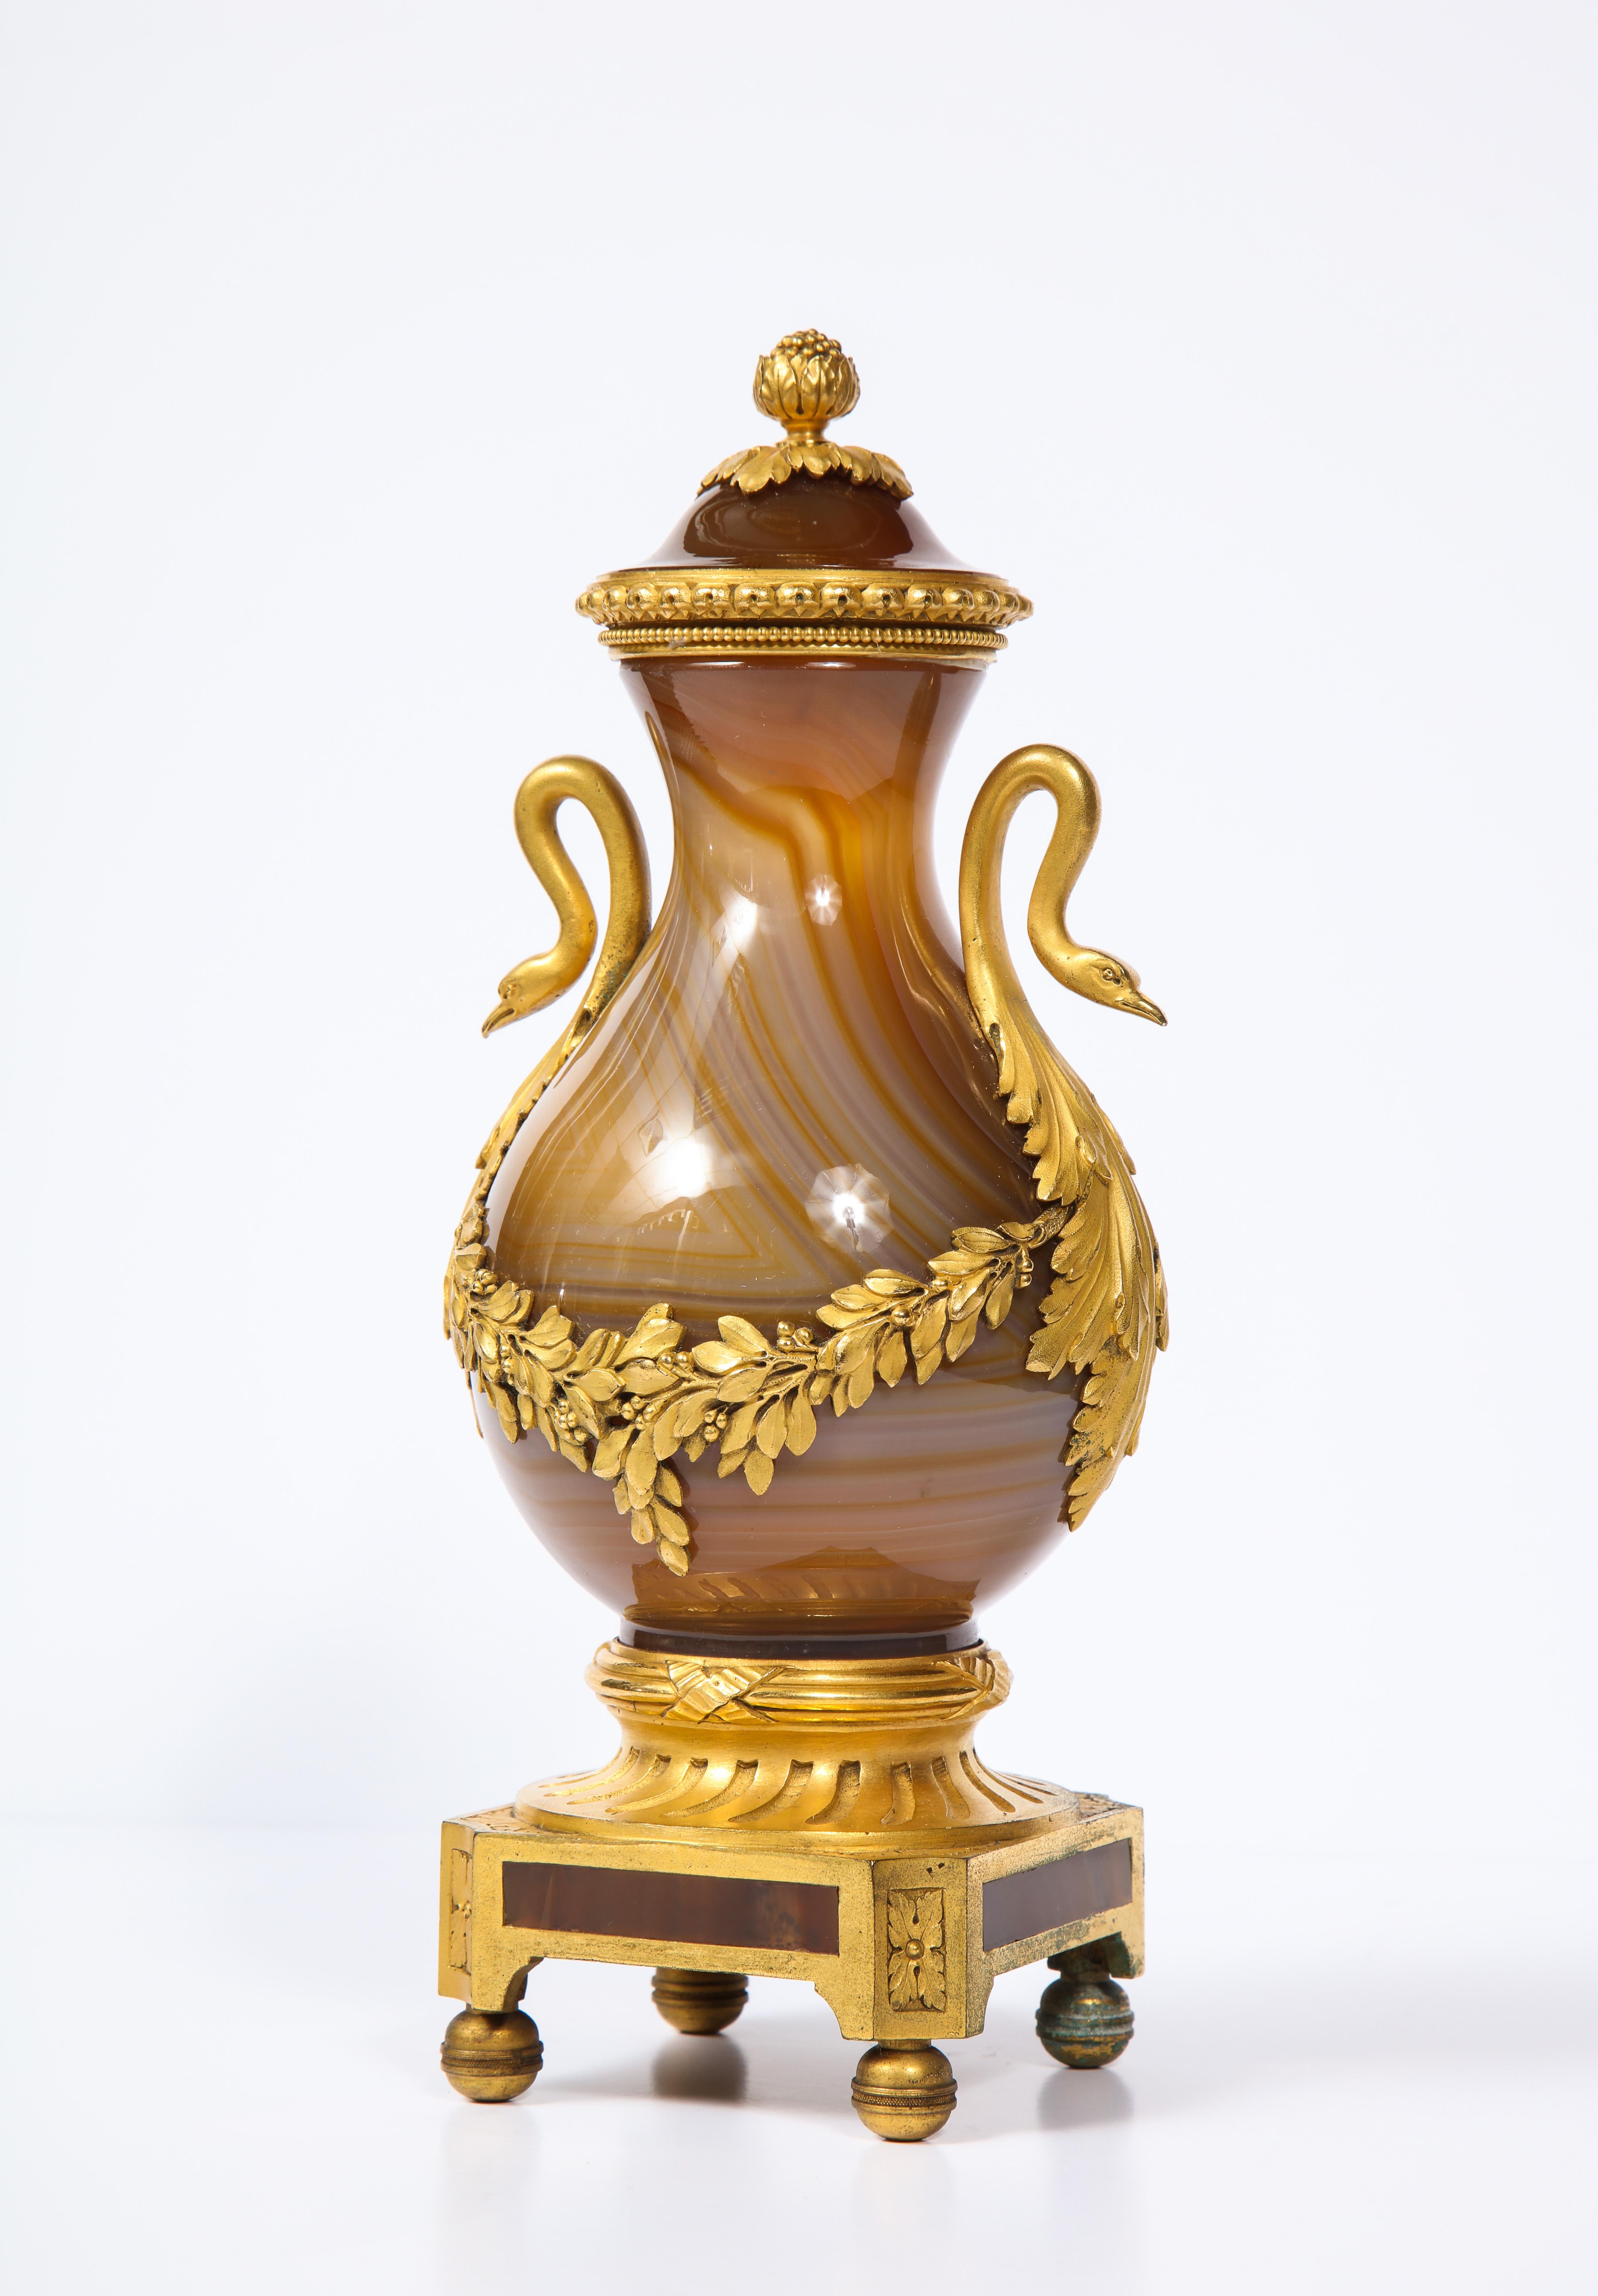 A magnificent Louis XVI Style Russian ormolu-mounted covered agate vase or Urn with finely hand-chiseled and Cast doré Bronze Swan Handles. This marvellous baluster form covered vase has been beautifully hollowed and hand carved from an exceptional